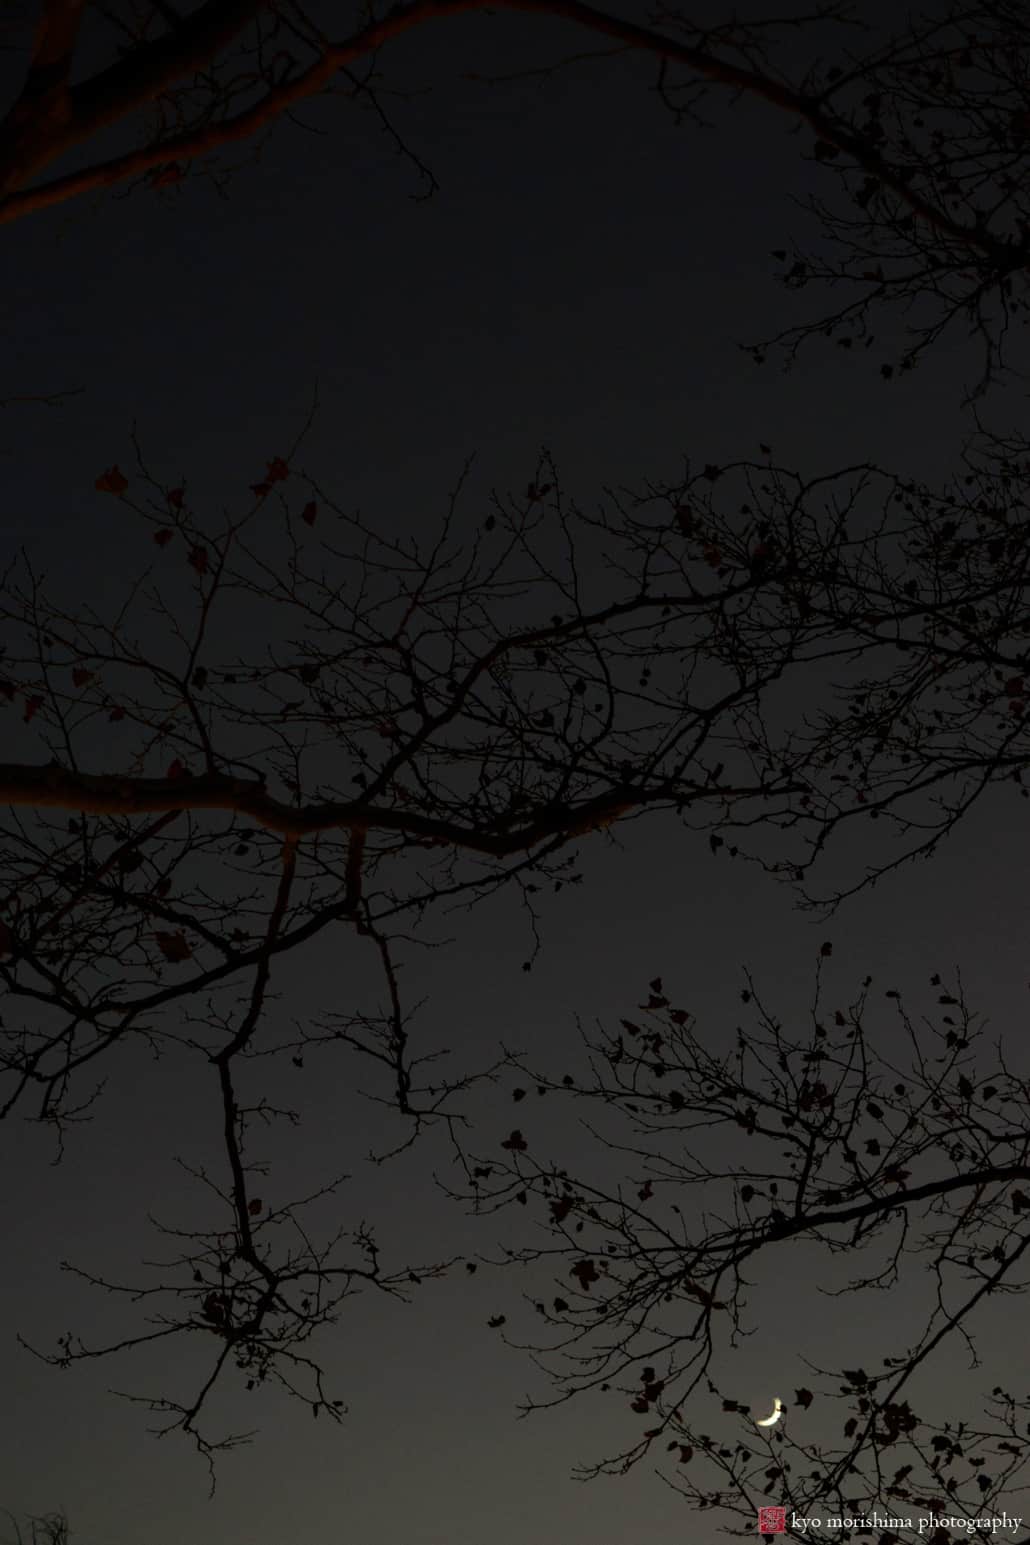 Tree branches barely perceptible in the evening sky with moon hanging low, photographed by Kyo Morishima